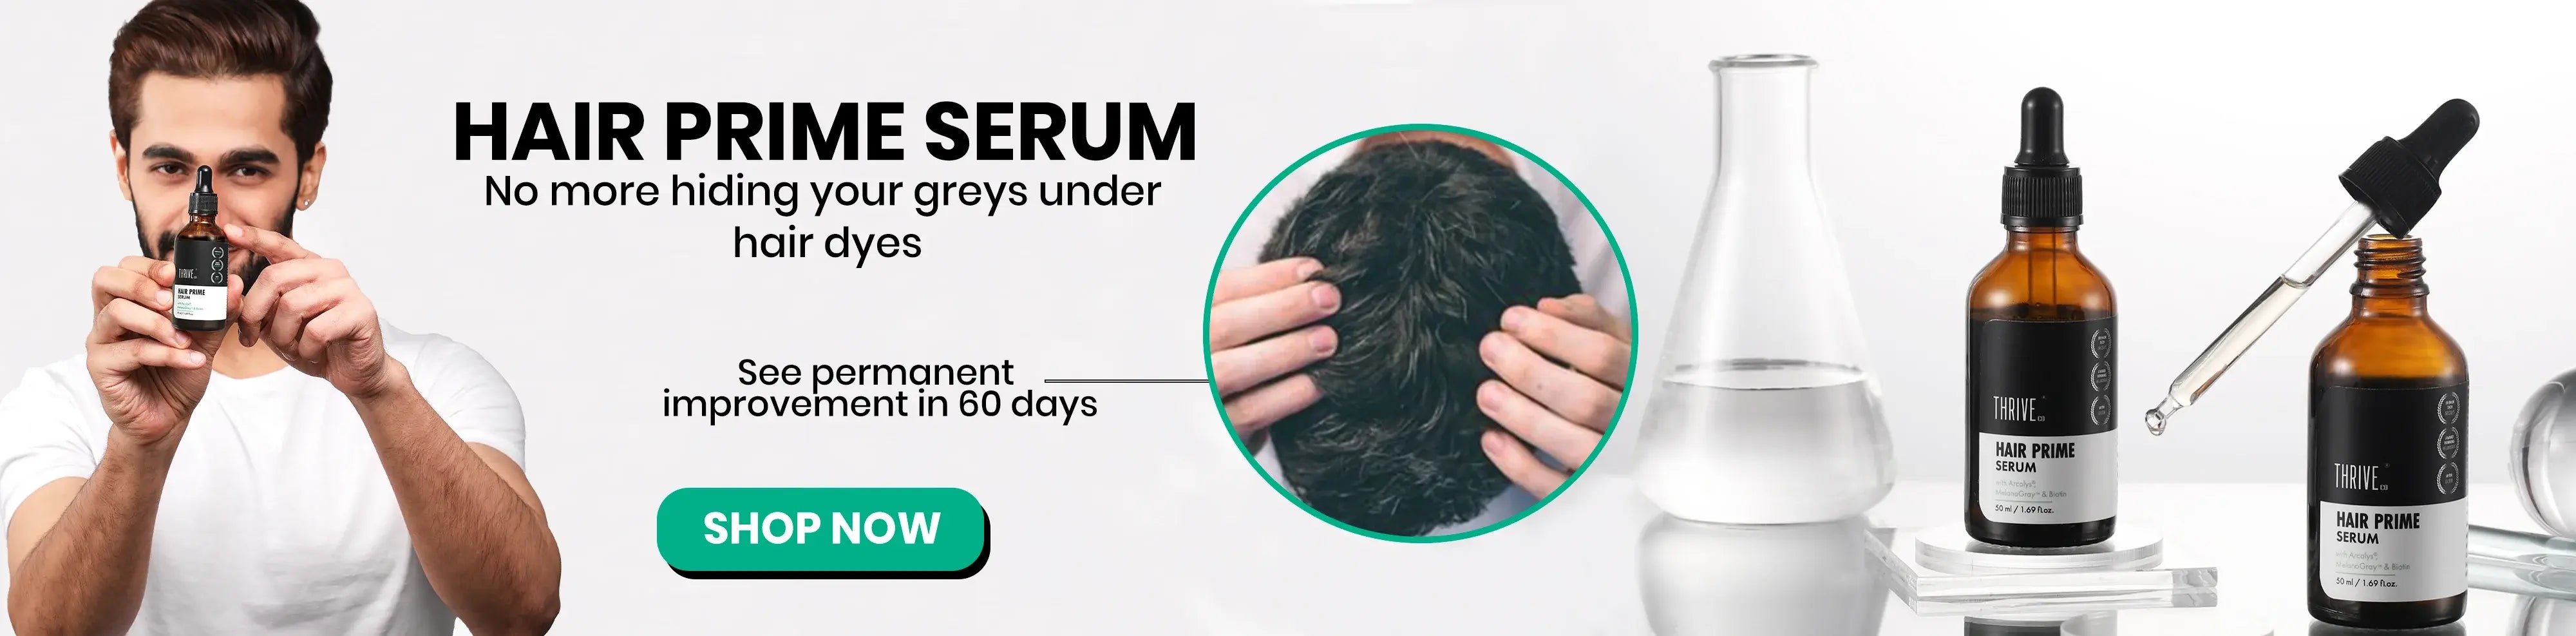 buy thriveco anti grey hair prime serum and see improvement in 60 days